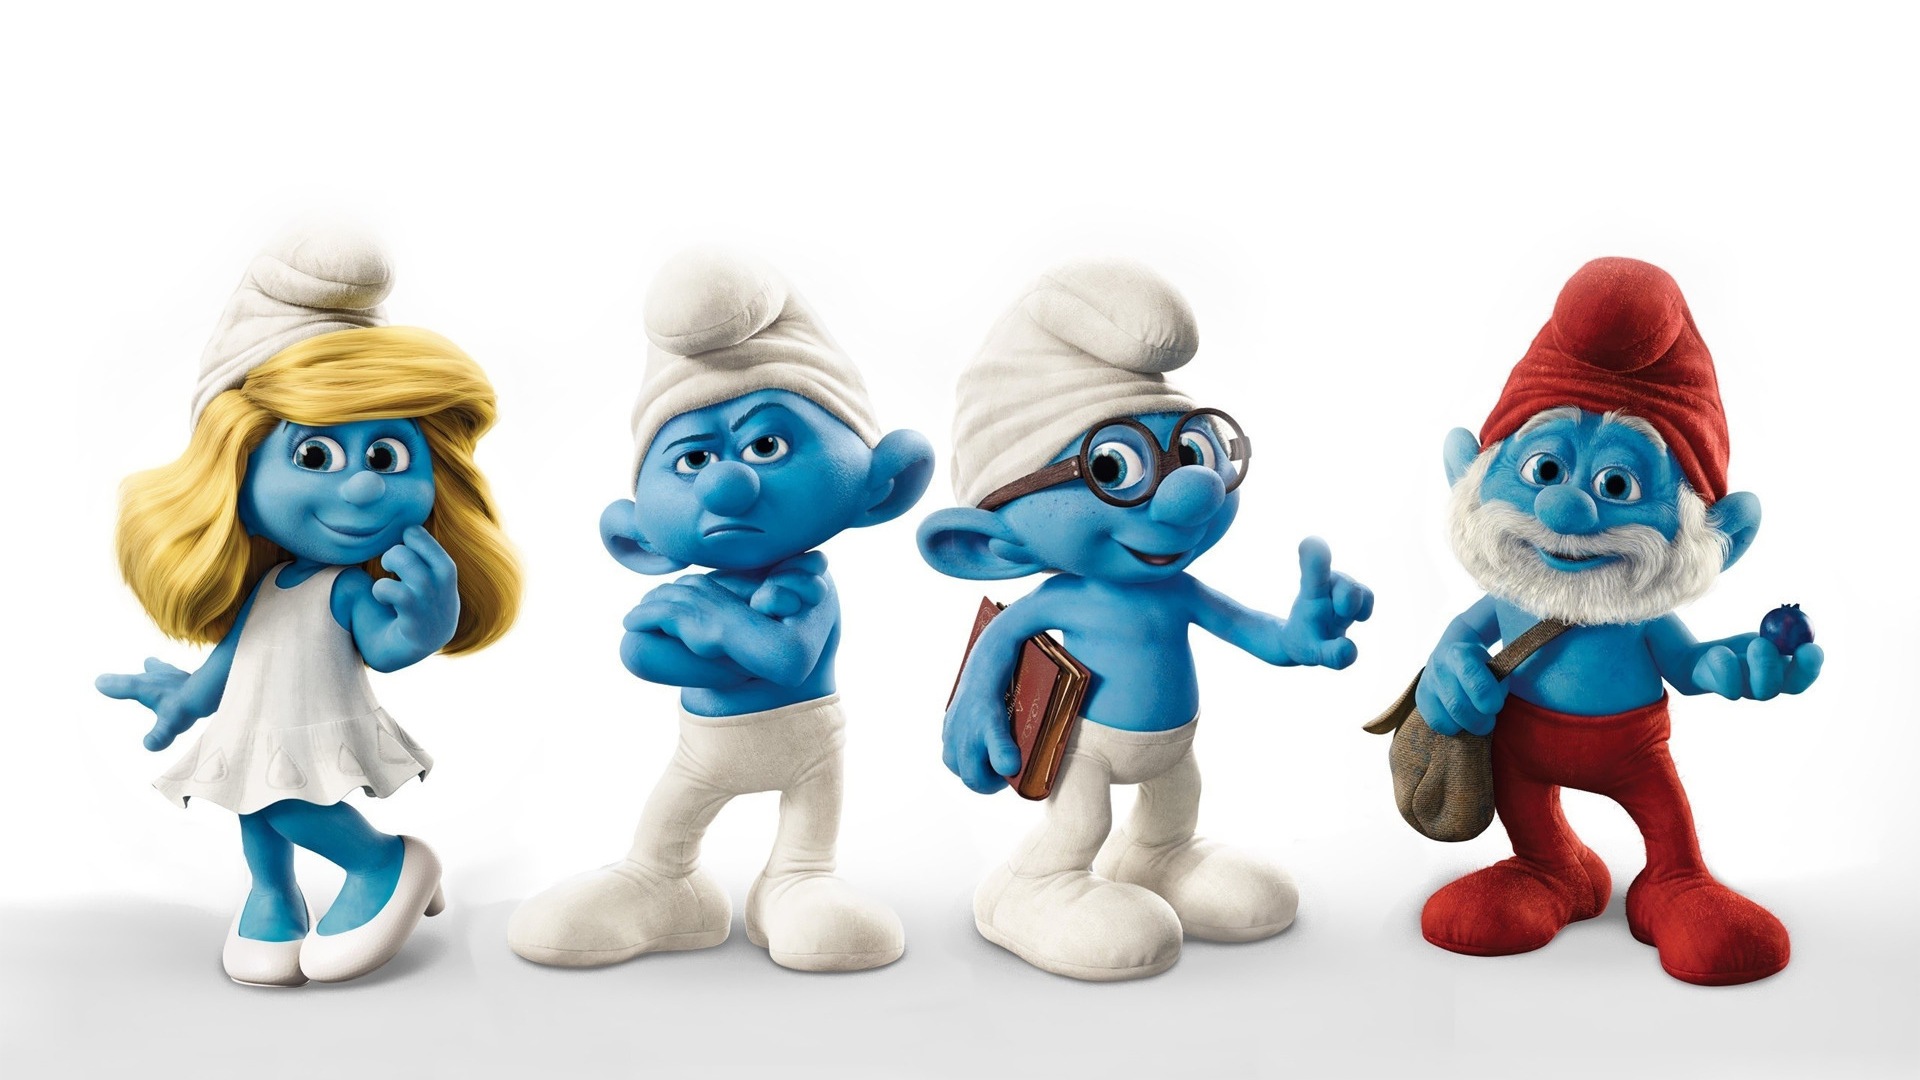 The Smurfs 2 HD movie wallpapers #3 - 1920x1080